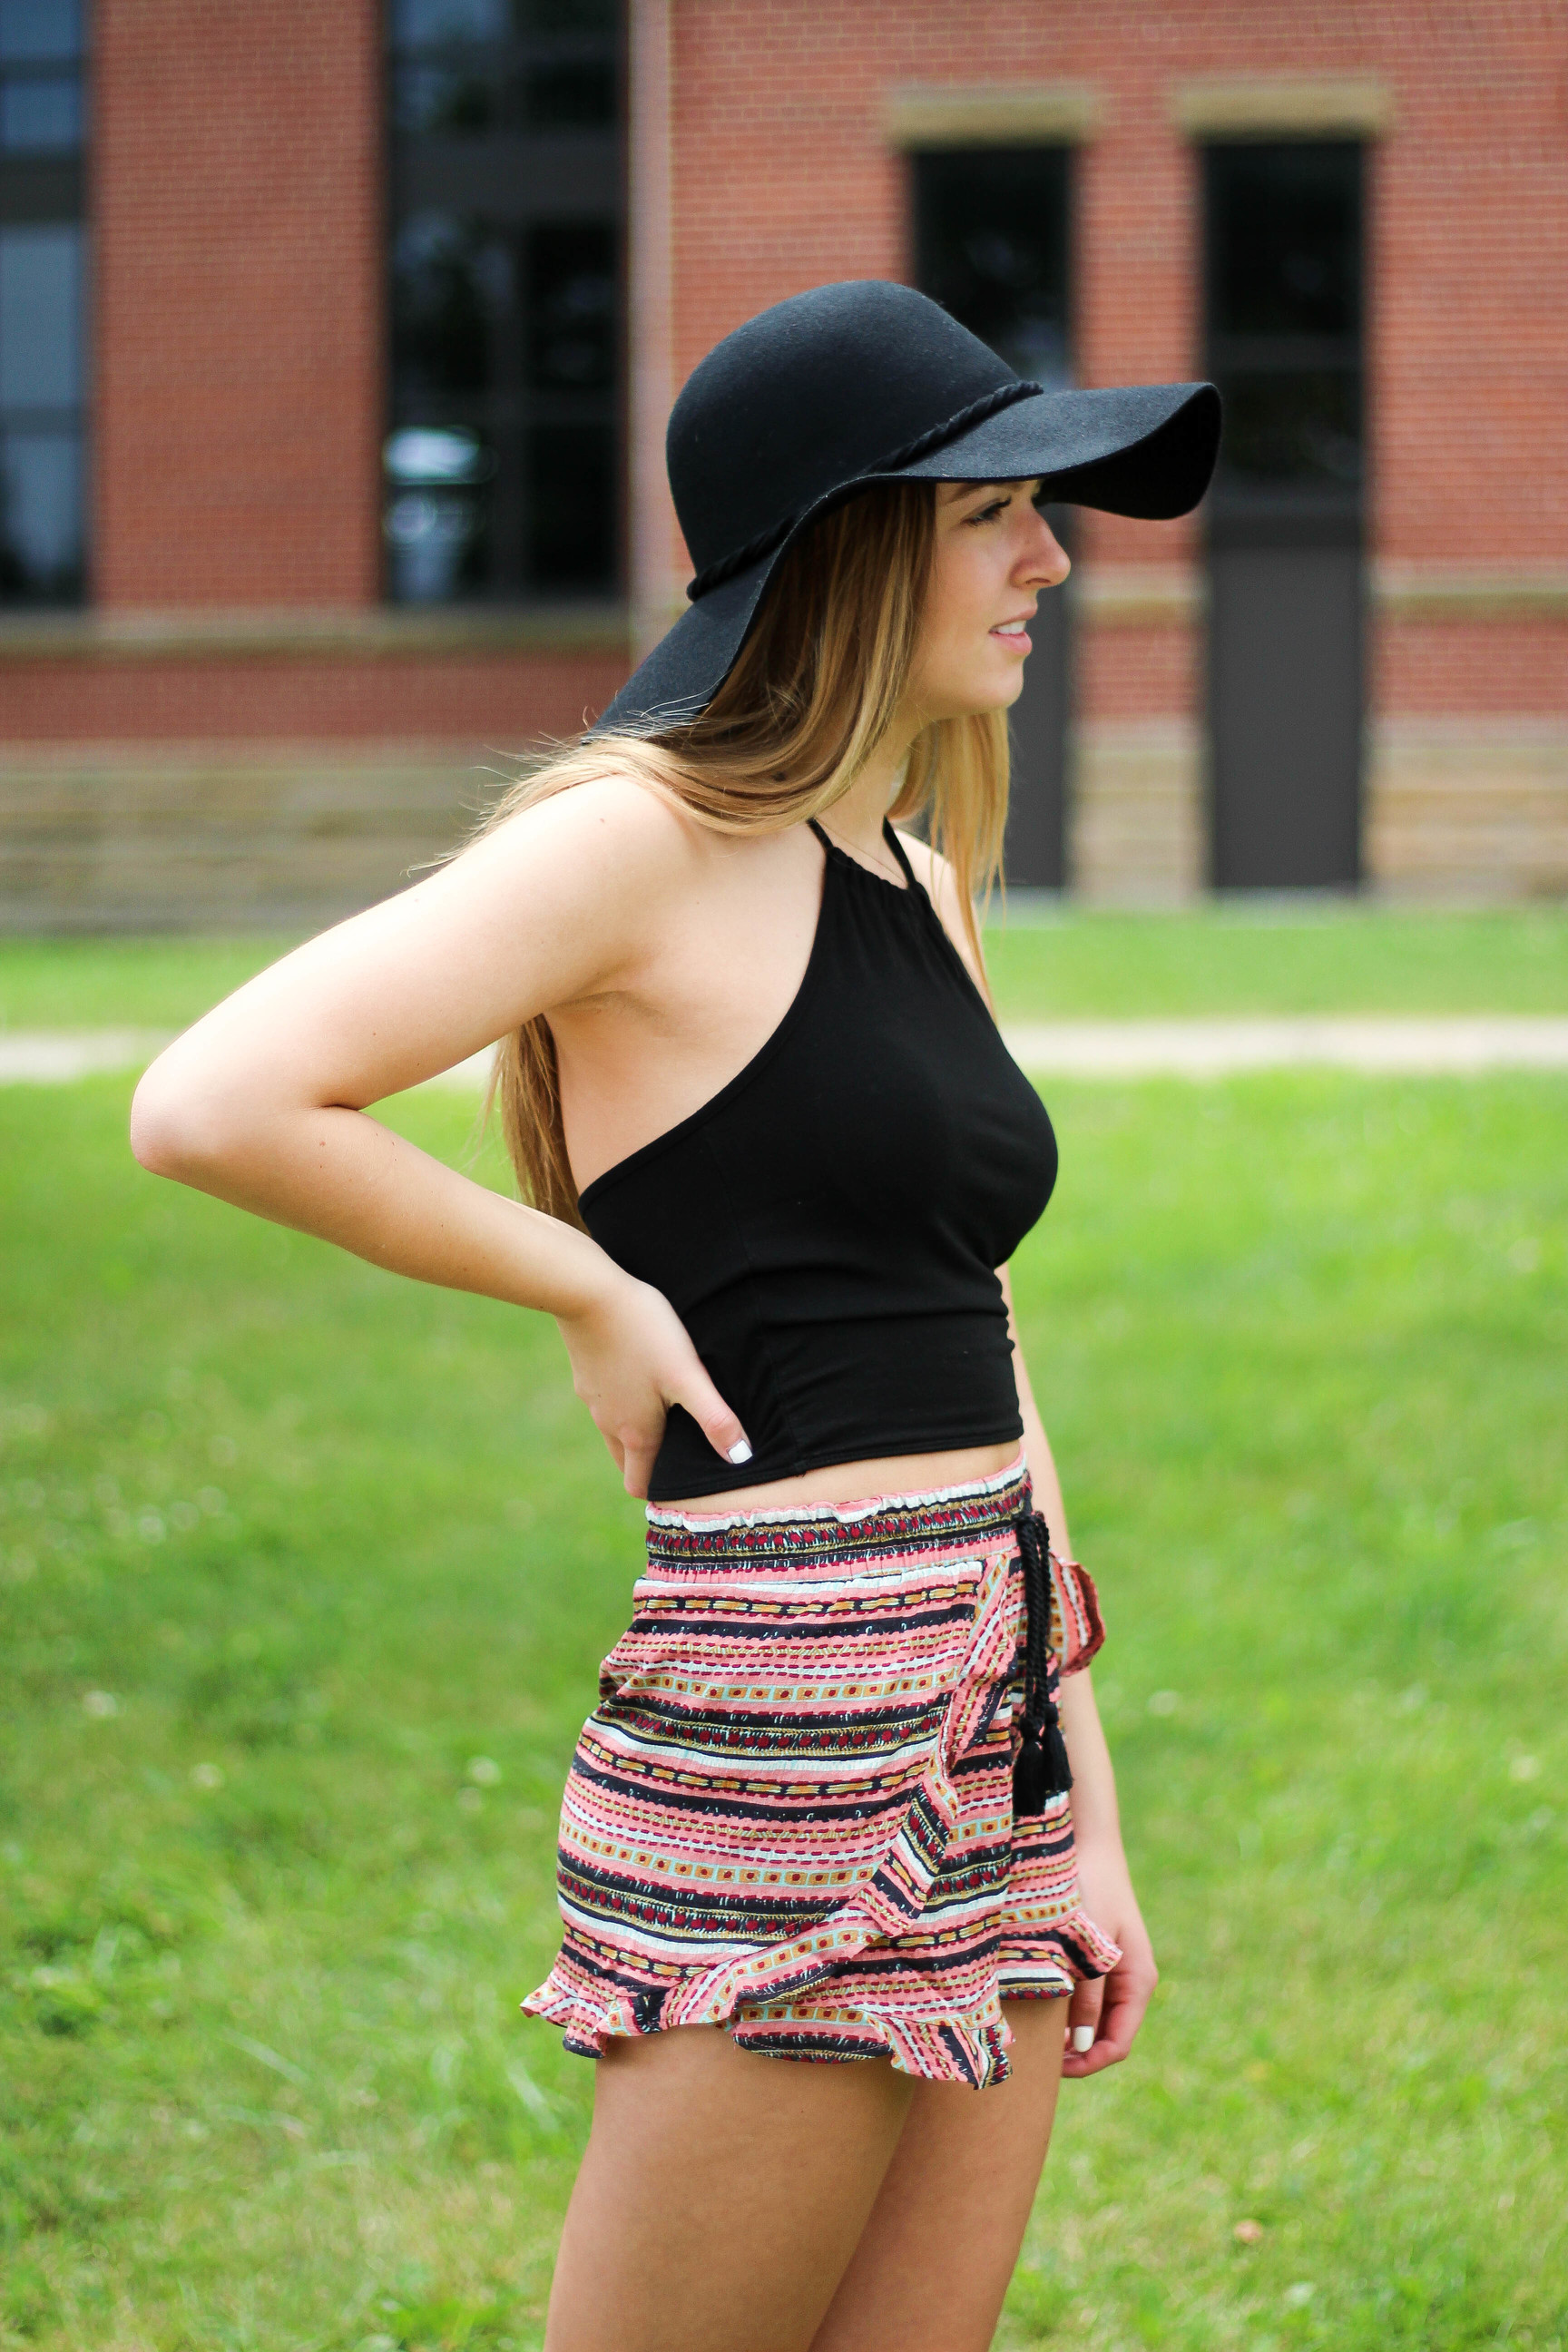 Black hat, floppy hat, brandy Melville top, boho outfit by lauren lindmark on daily dose of charm